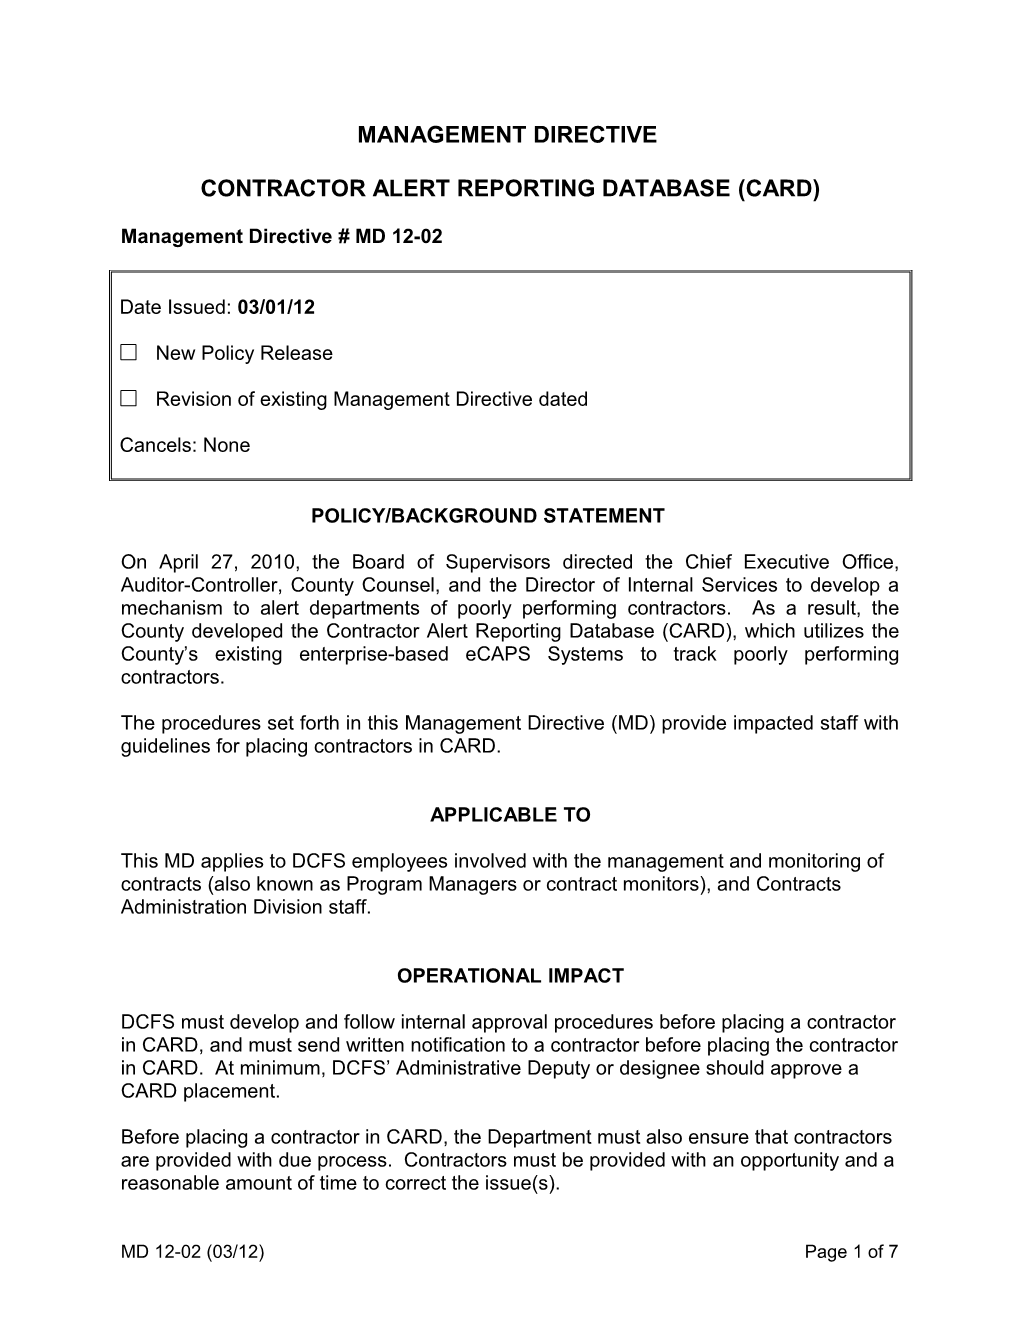 MD 12-02, Contractor Alert Reporting Database (CARD)